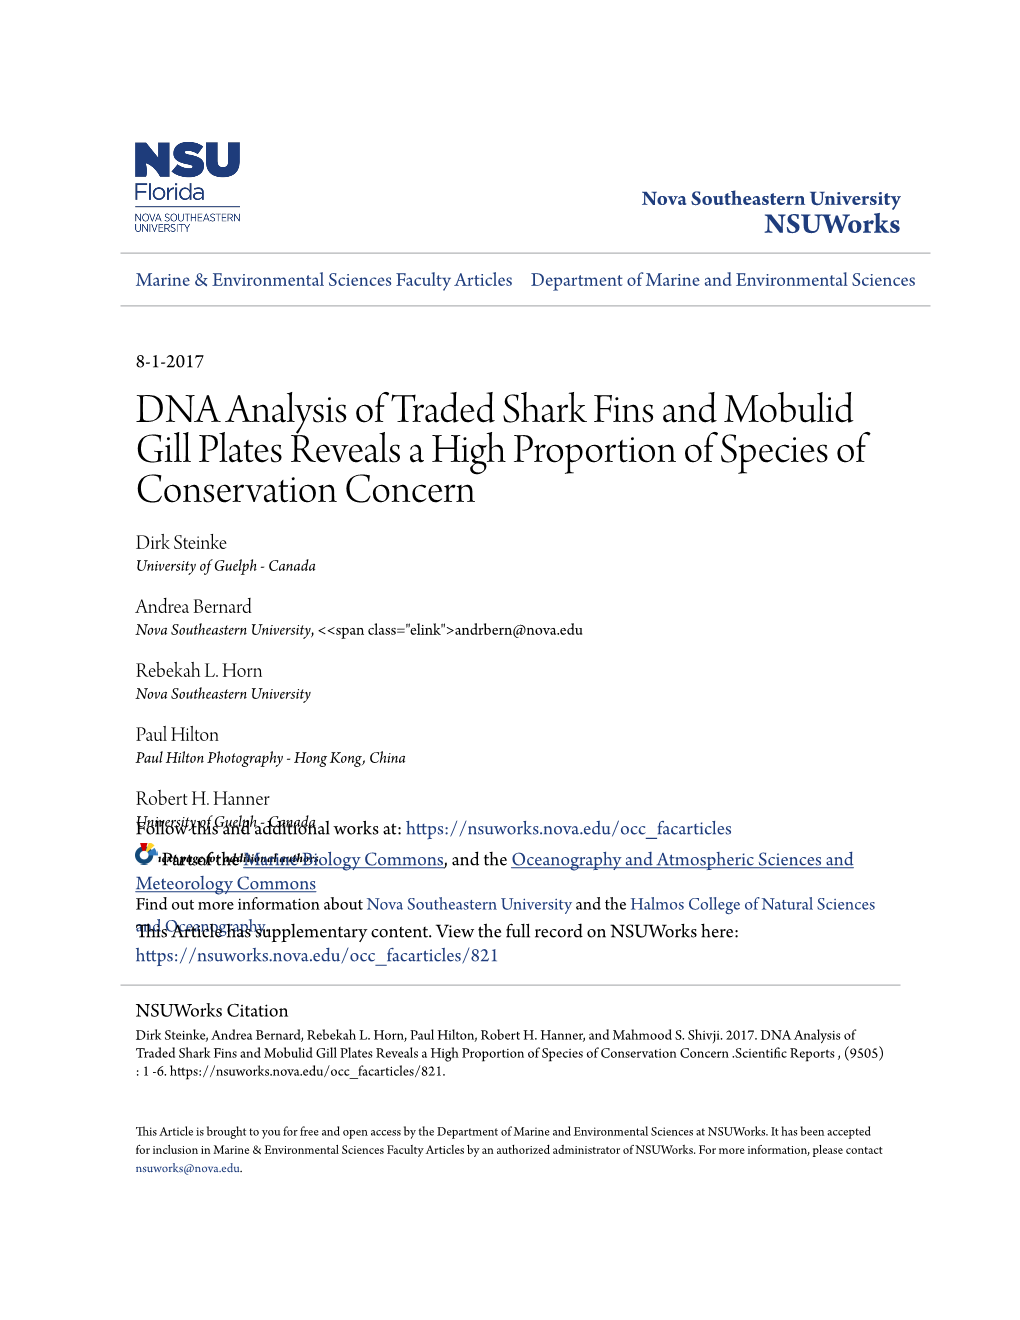 DNA Analysis of Traded Shark Fins and Mobulid Gill Plates Reveals a High Proportion of Species of Conservation Concern Dirk Steinke University of Guelph - Canada